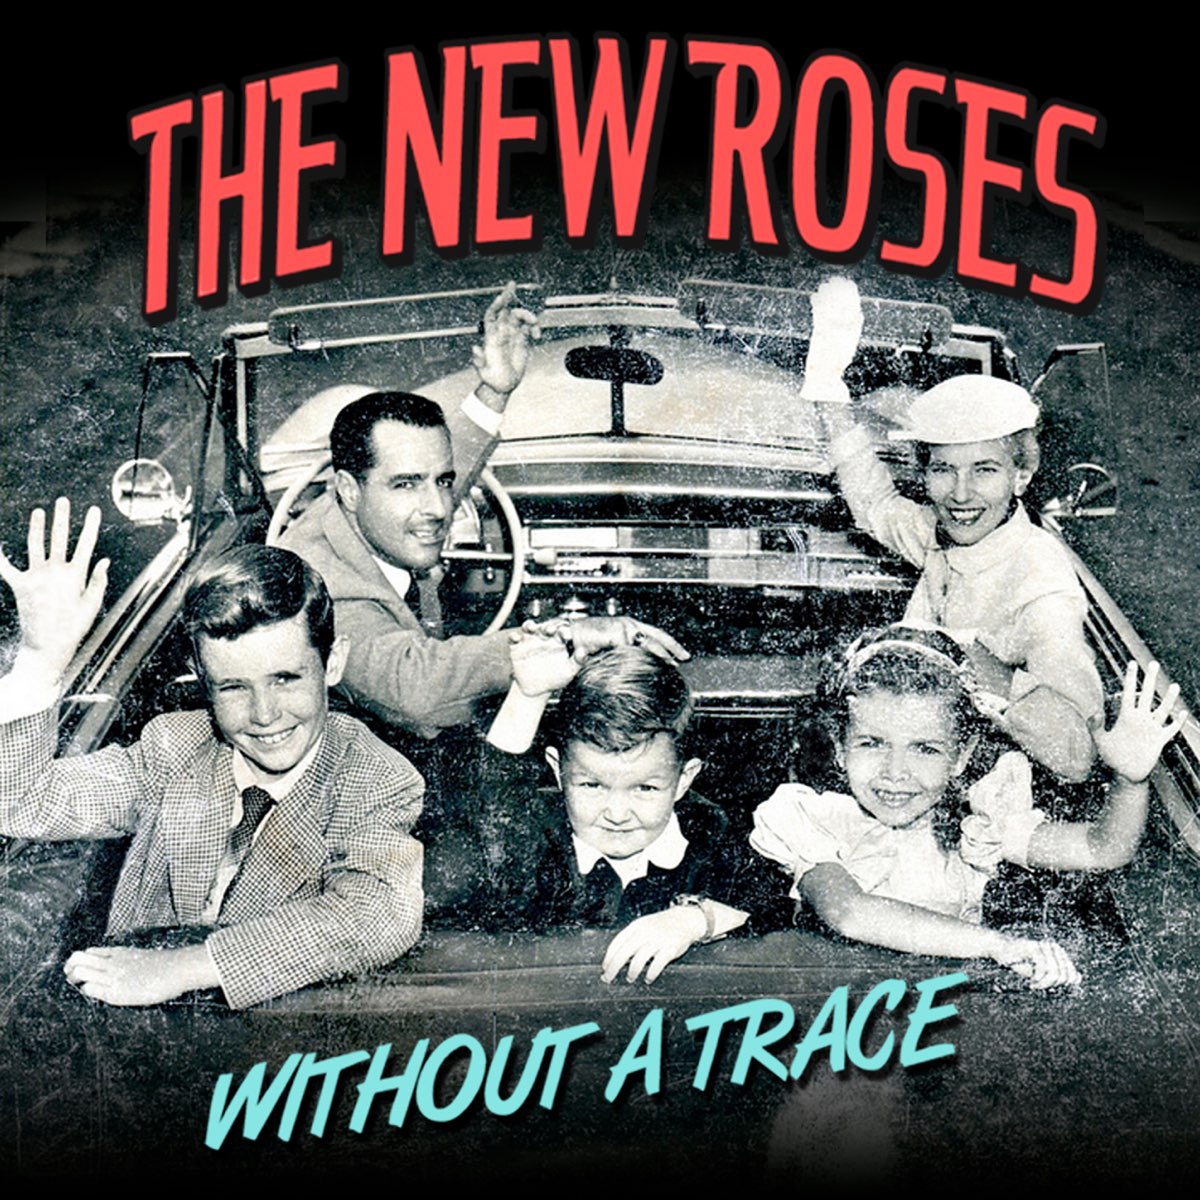 The new roses. Without a Trace. Группа the New Roses - альбом without a Trace. Группа the New Roses - альбом one more for the Road.